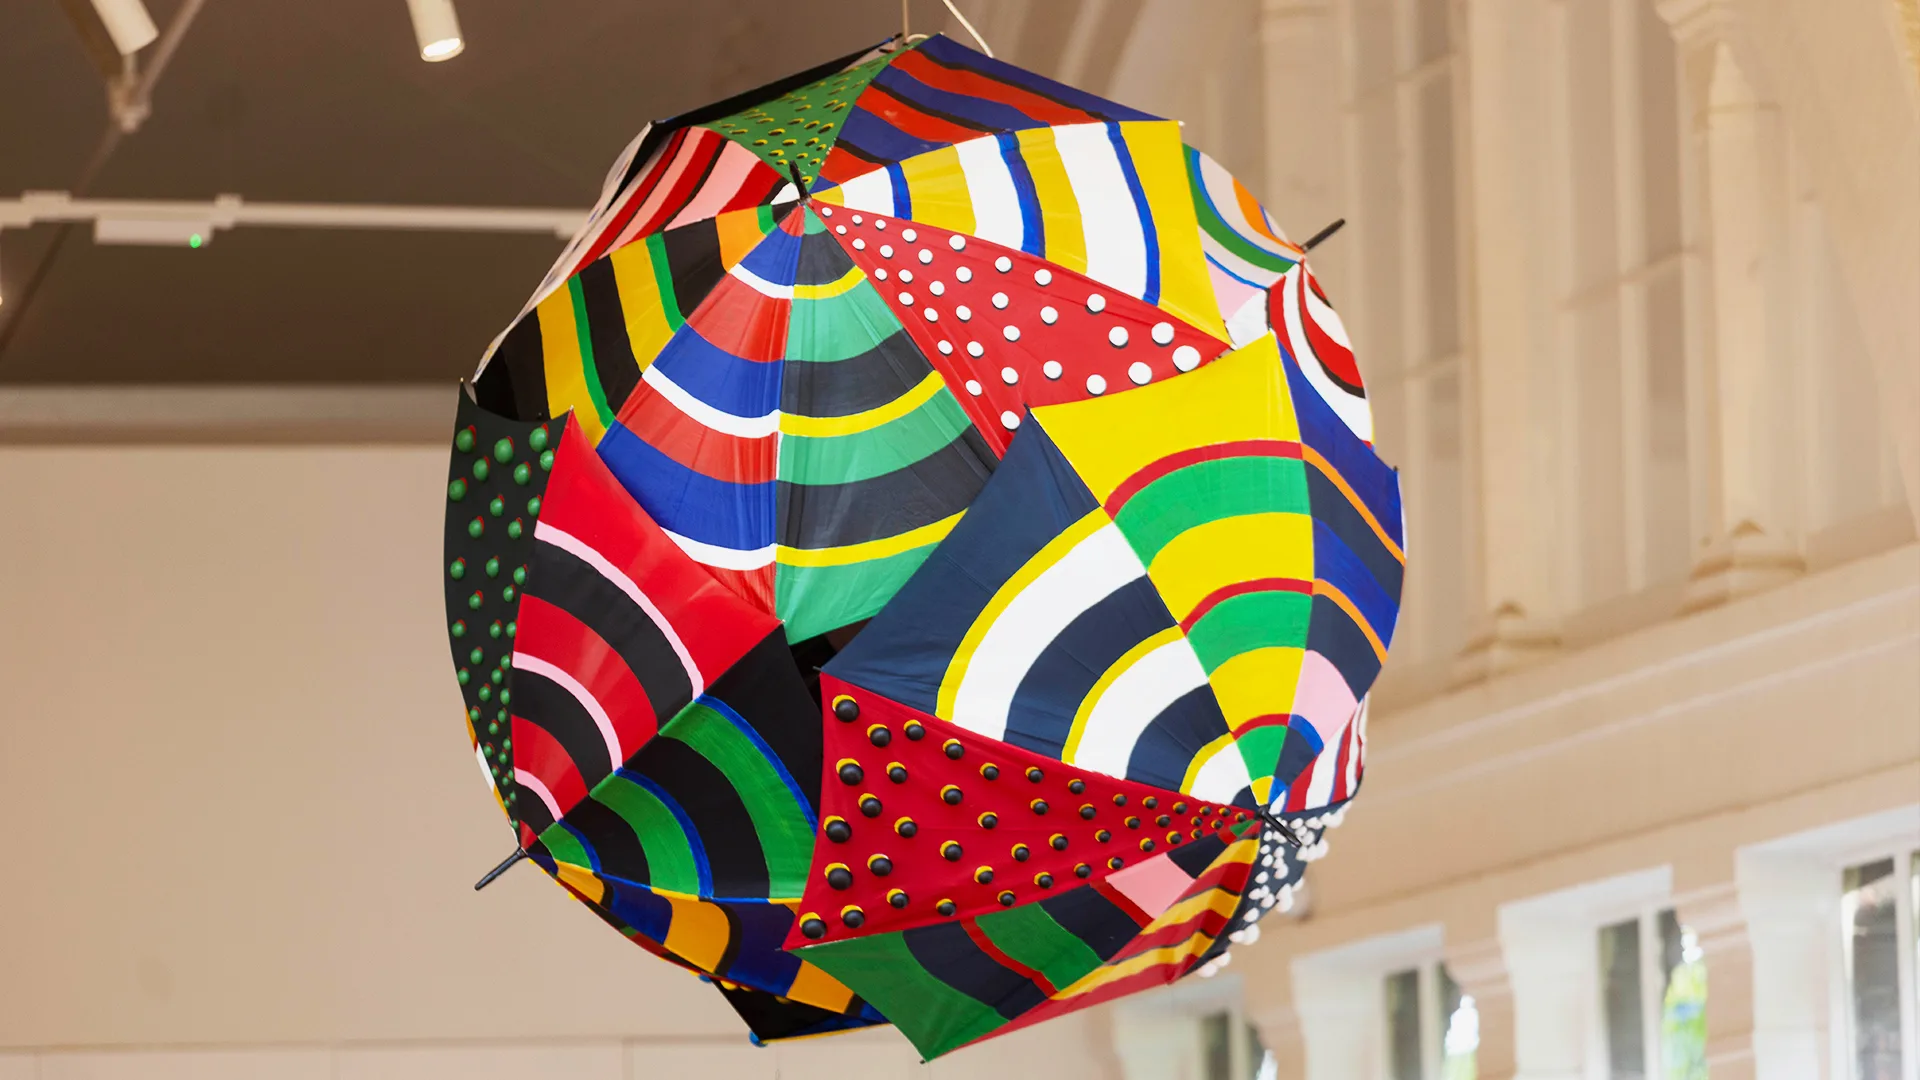 A 3d Yōkai monster is suspended from the ceiling of the Young V&A museum. It is made of multiple umbrellas attached together so it looks like a big colourful ball!